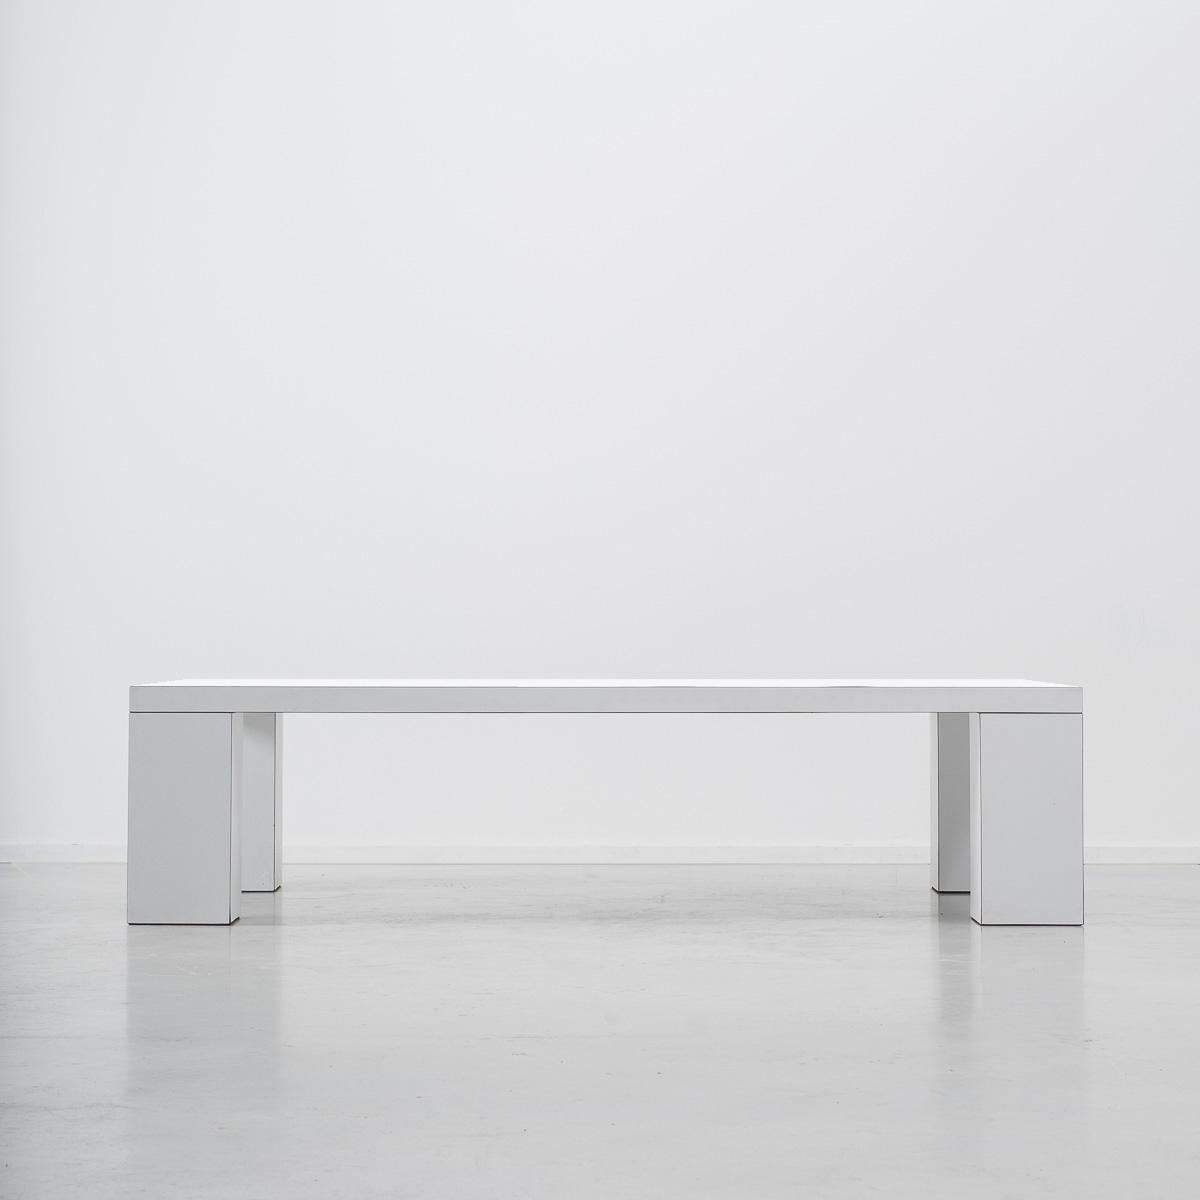 A striking piece of minimalism produced by Dutch company Metaform in the 1970s. Relying heavily on proportion and subtle detailing the table would be equally at home as a coffee table or a low console. The white laminate surface is ever so slightly